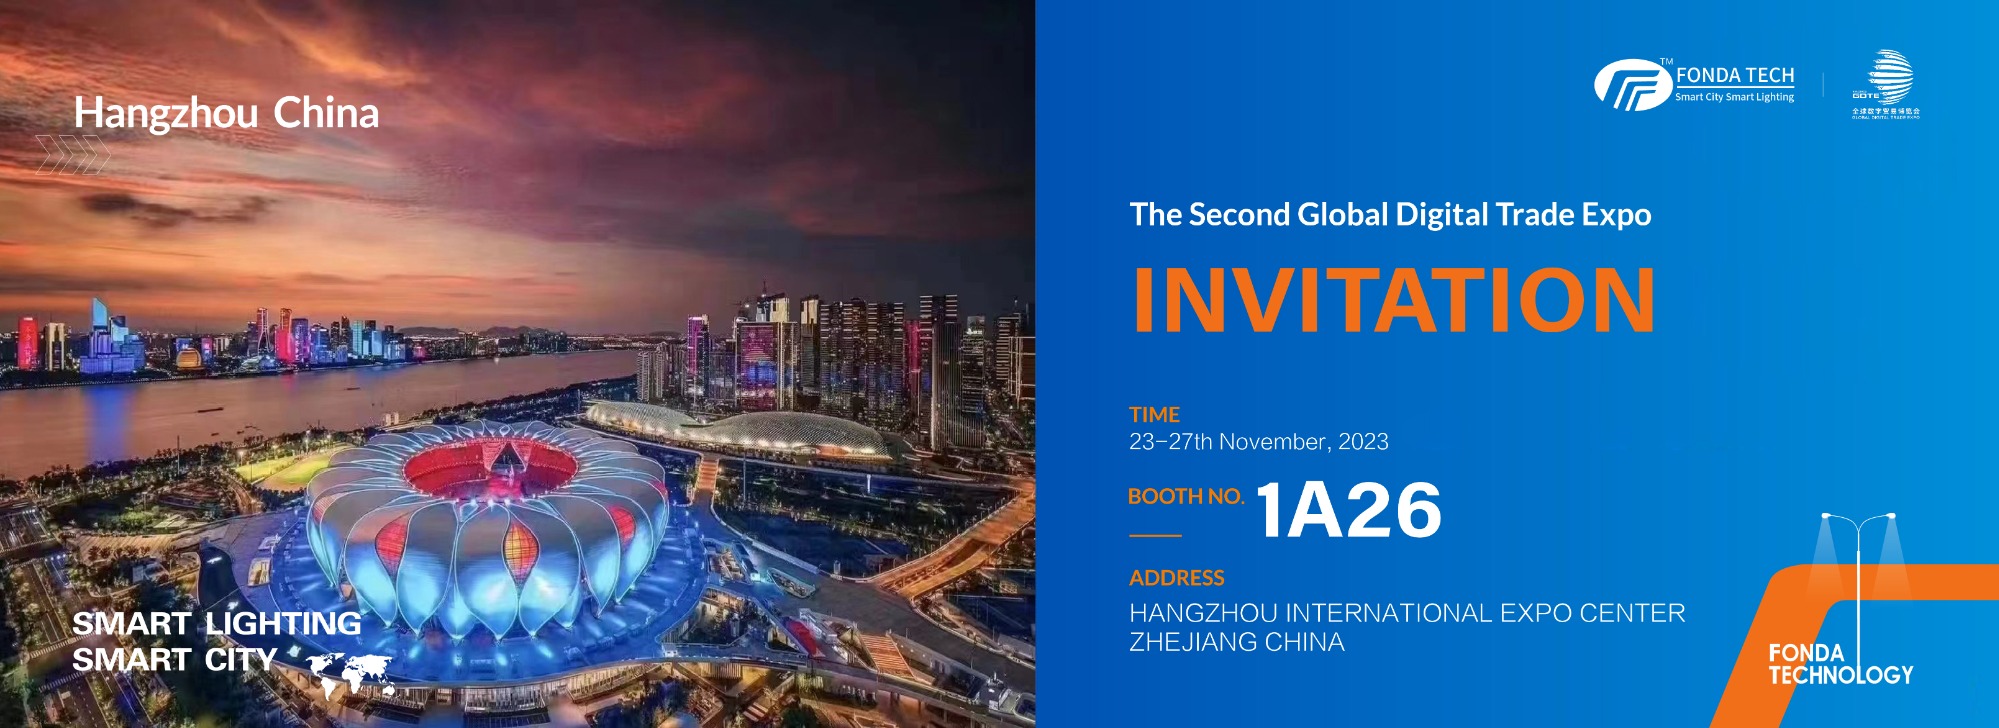 We cordially invite you to attend the 2023 Global Digital Trade Expo.